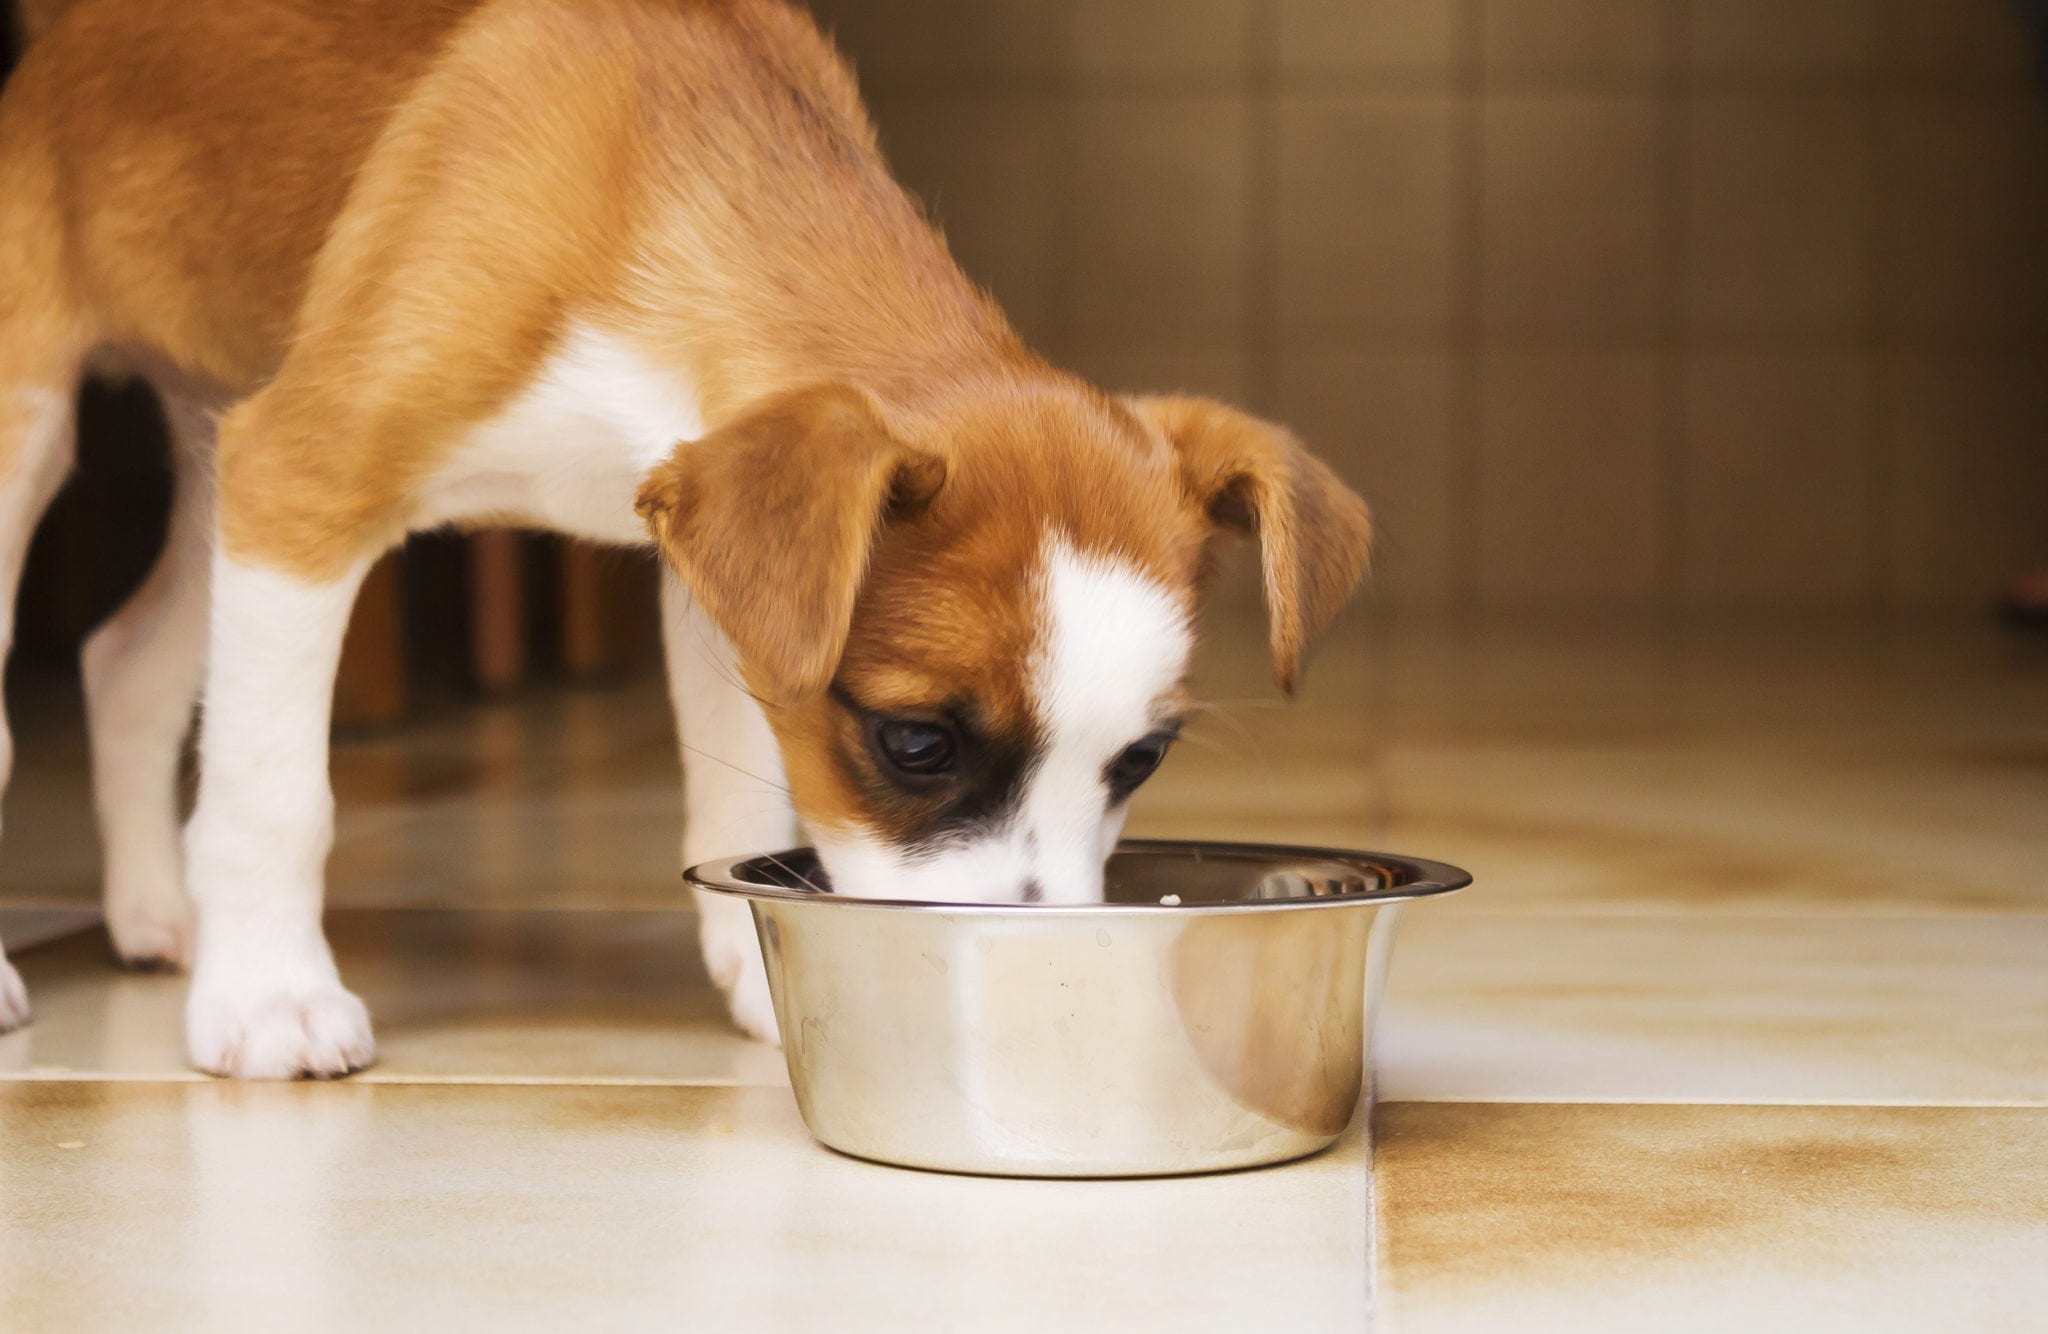 a puppy eating out of a metal food bowl